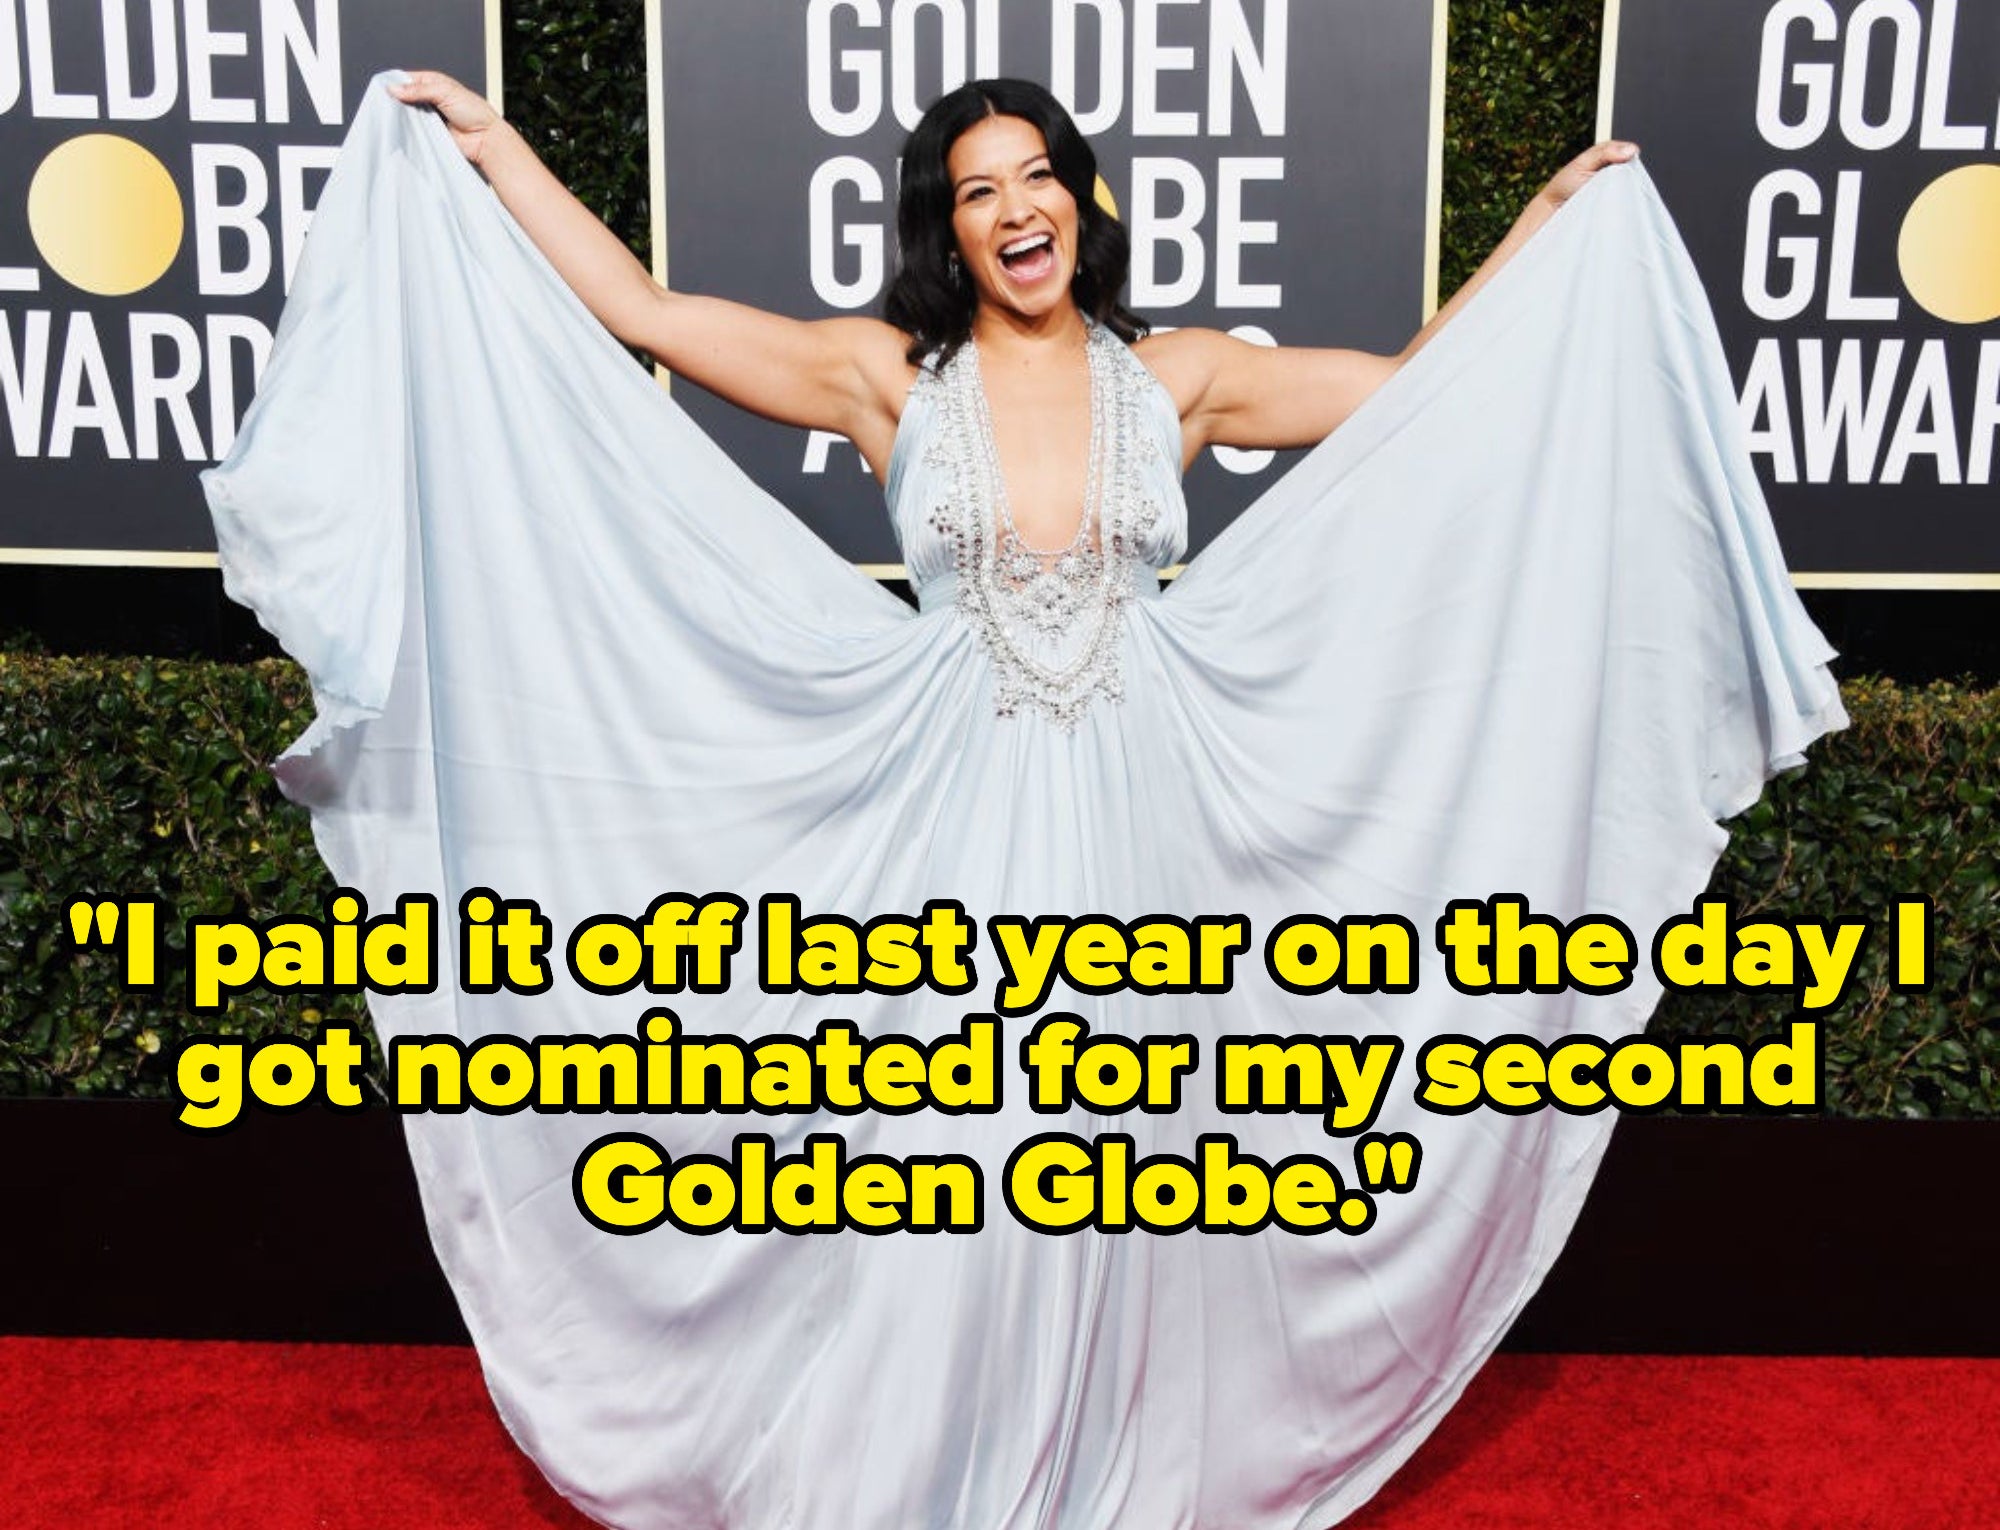 Caption: I paid it off last year on the day I got nominated for my second Golden Globe